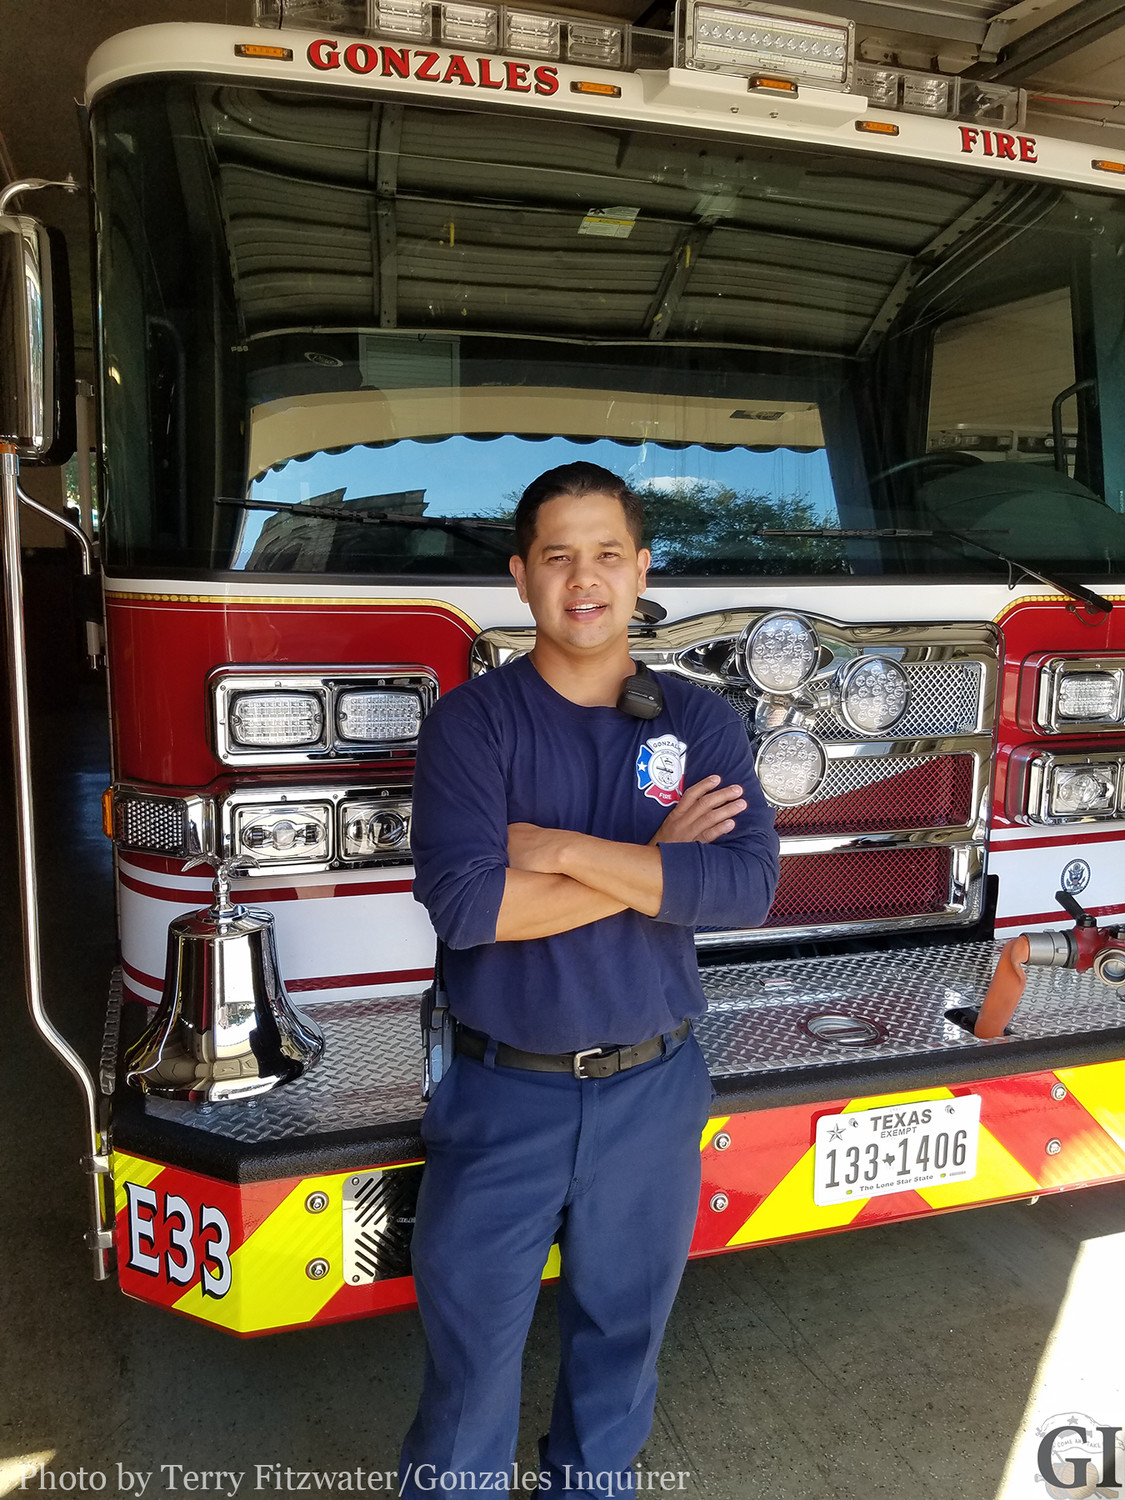 Despite a bit of teasing from the guys at the fire station, Eddie Velazquez enjoyed his time as an extra in filming the T.V. series The Son.